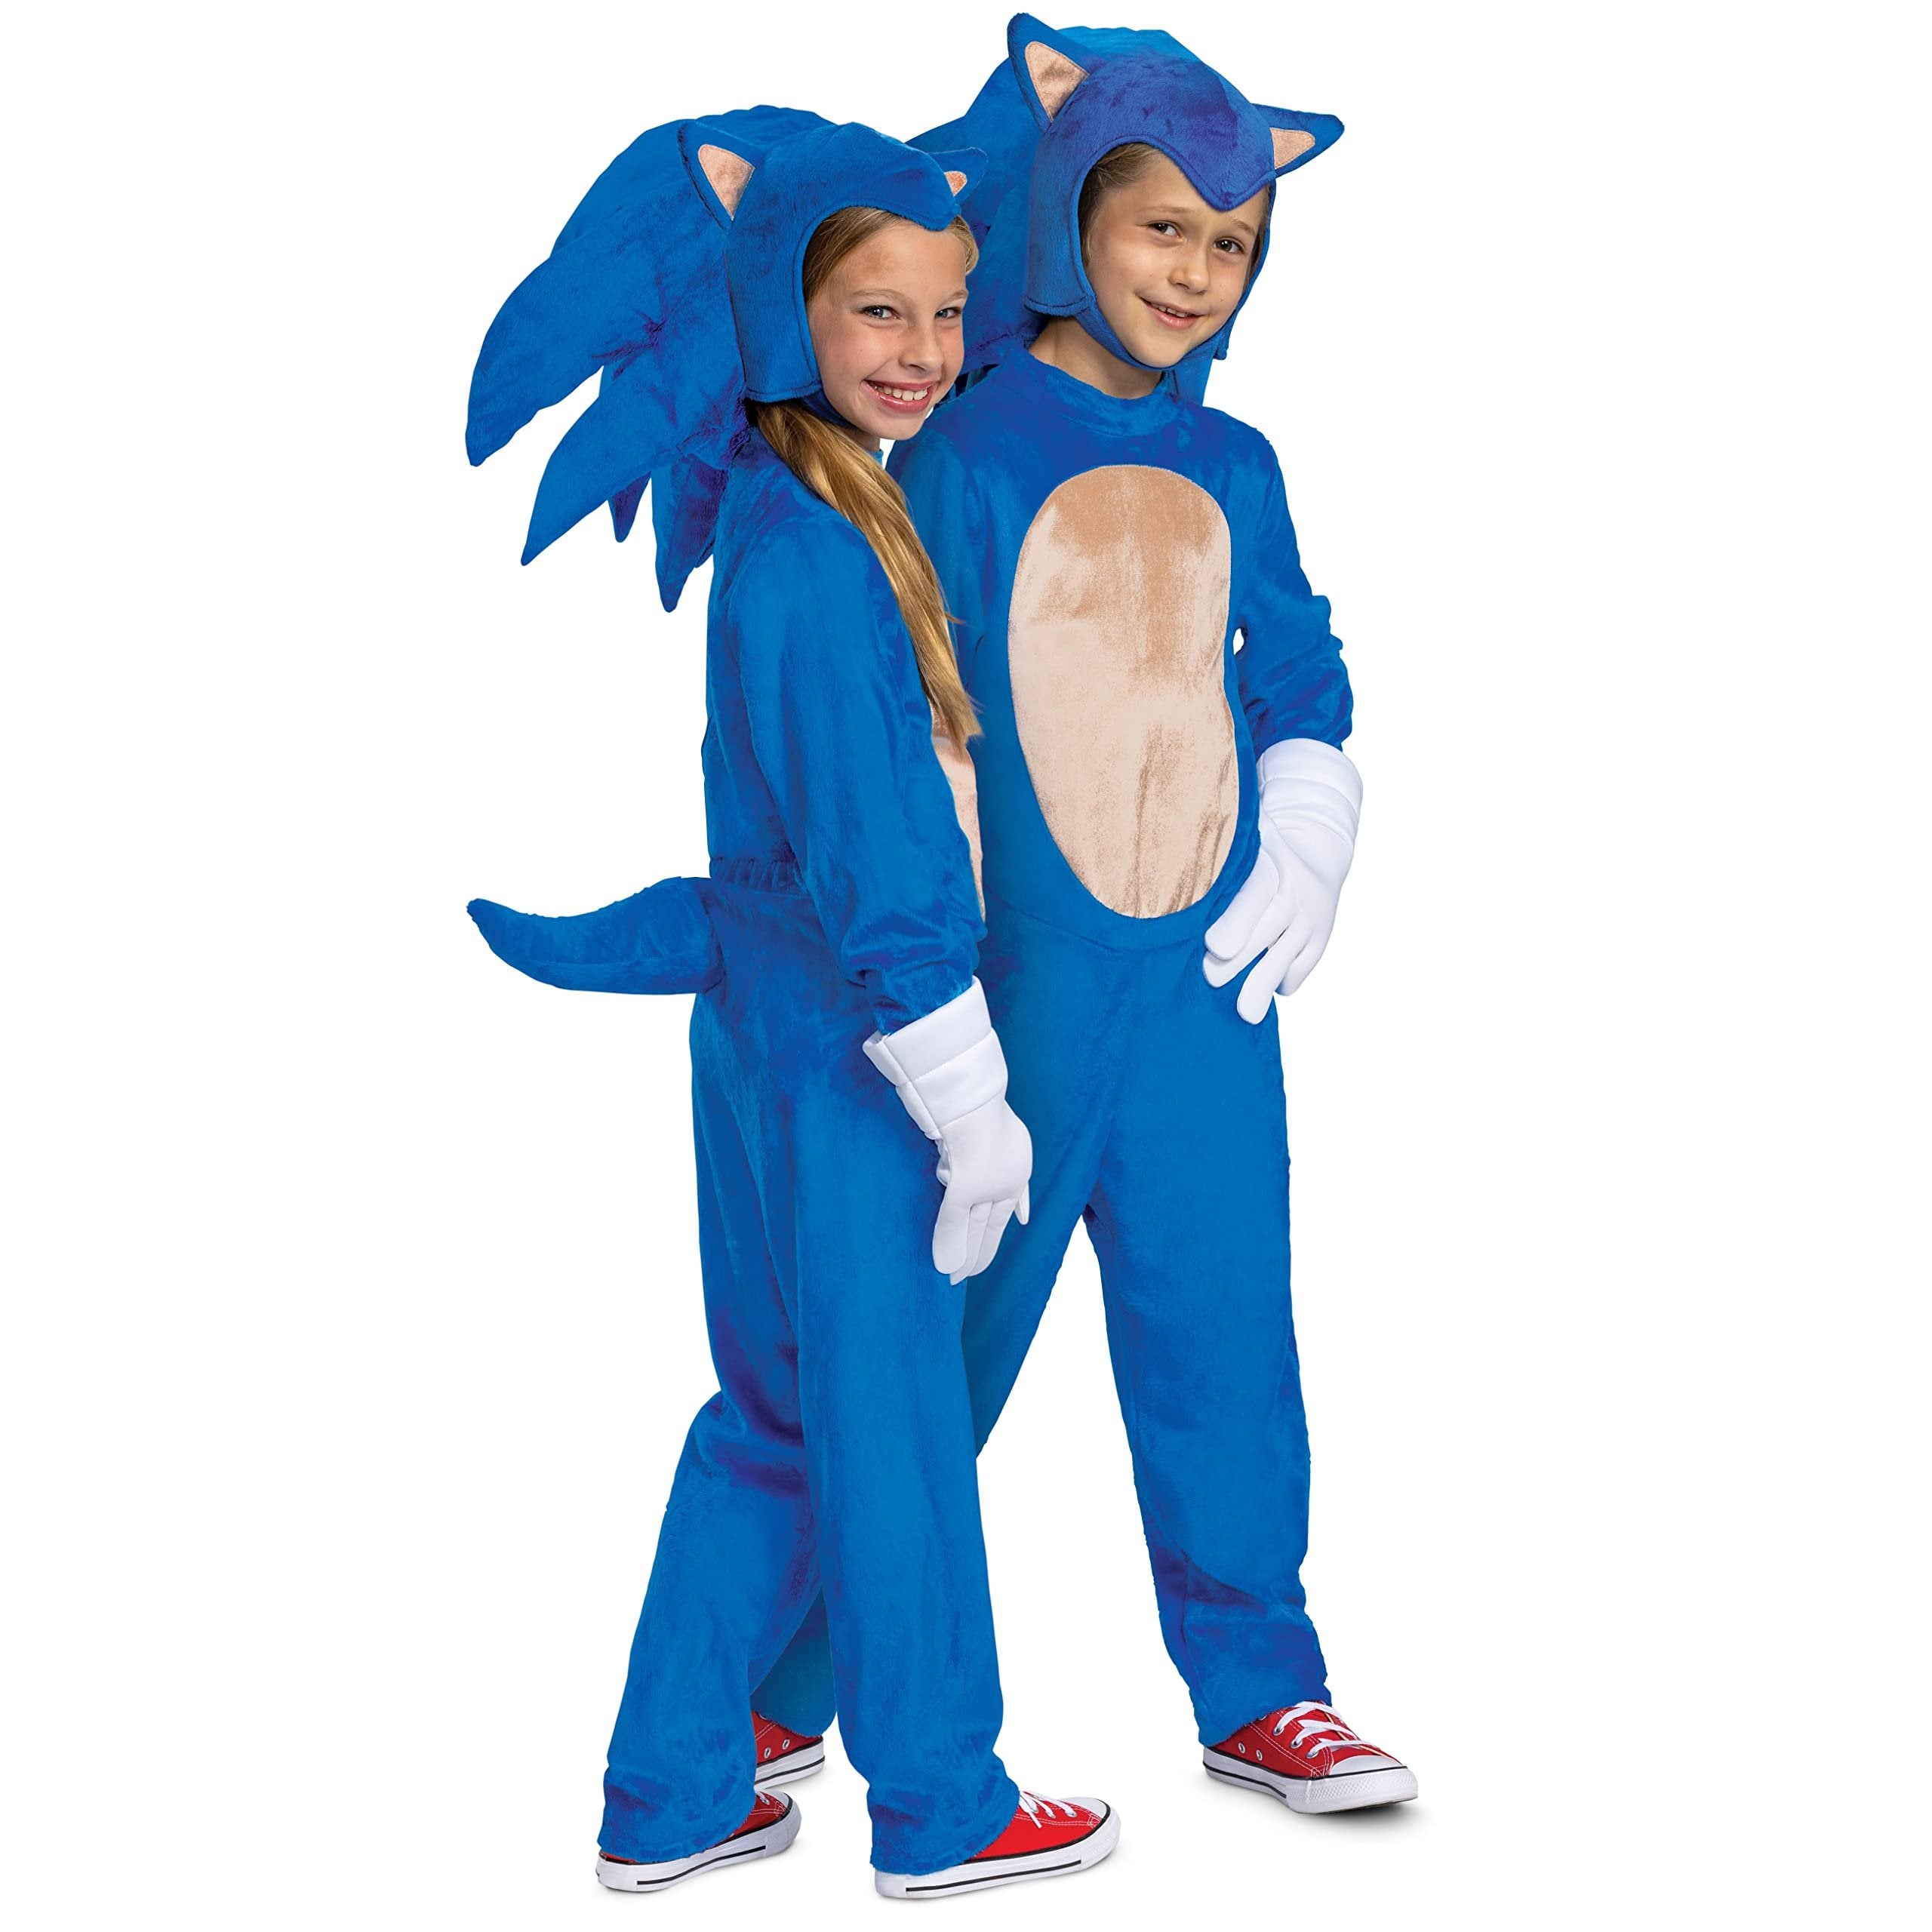 Official Deluxe Sonic Movie Kids Costume w/ Headpiece - Small (4-6), As Shown - Free Shipping & Returns